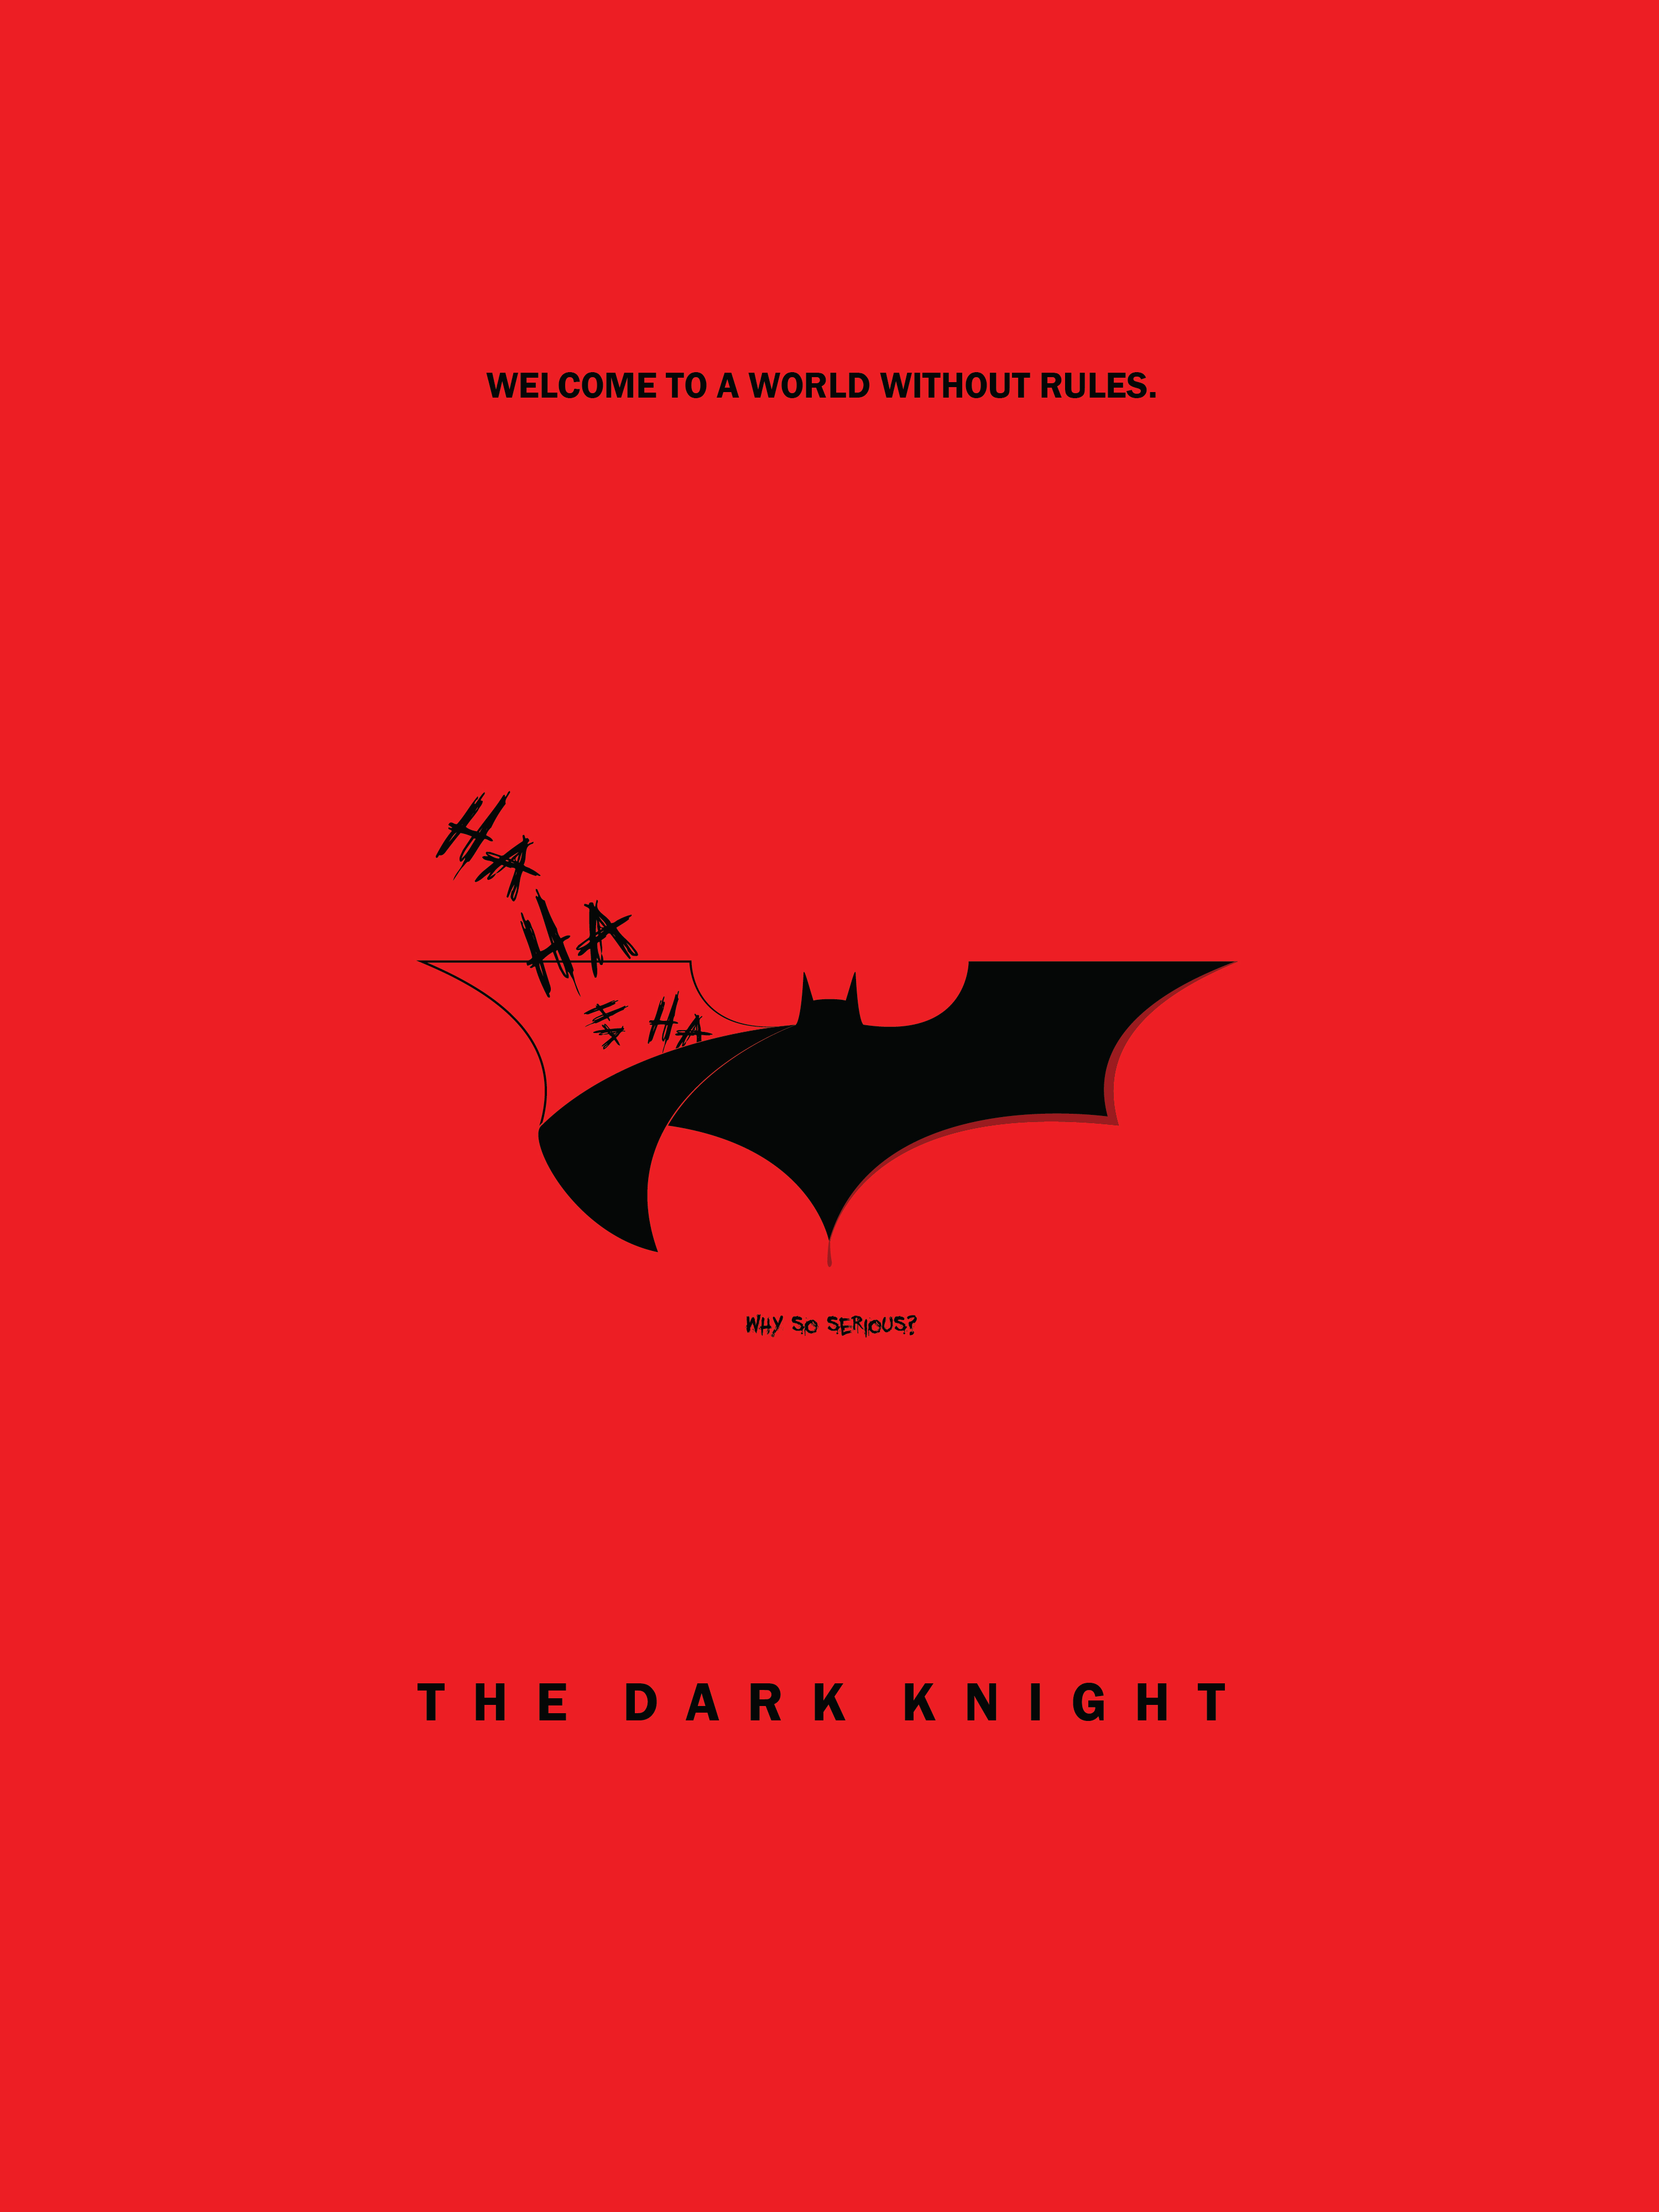 #The Dark Knight, #Red, #Minimal, #Why So Serious